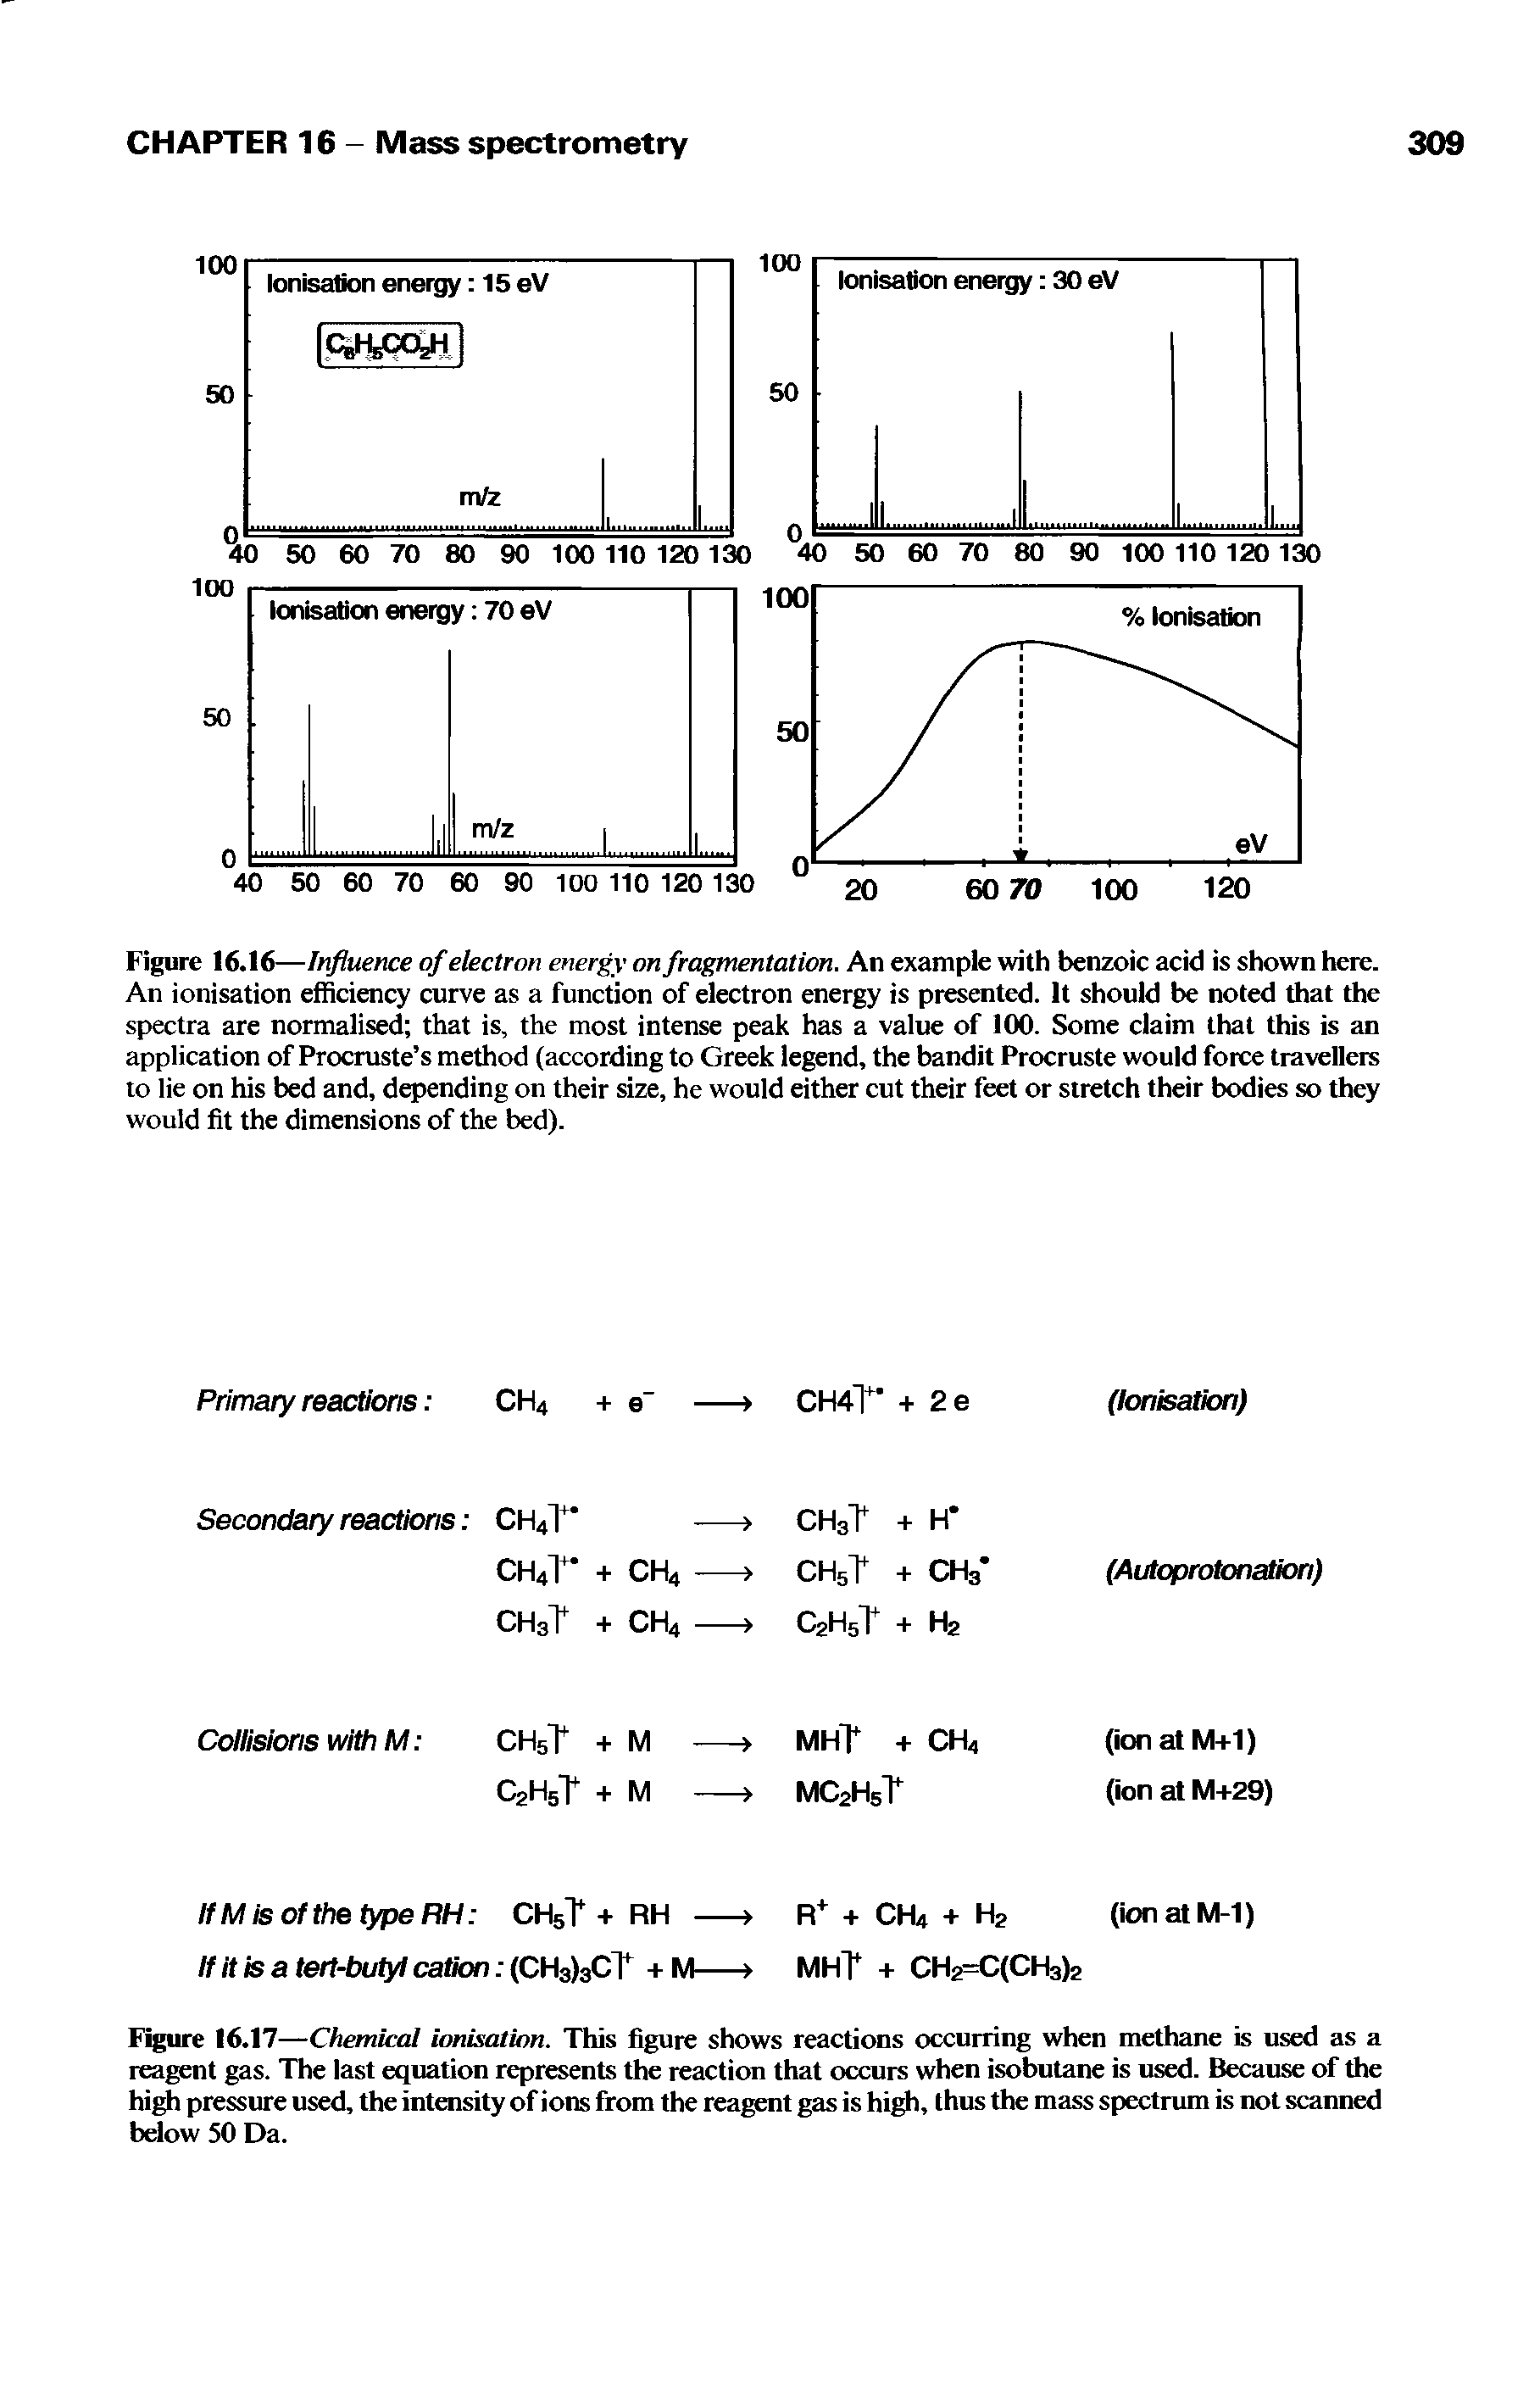 Figure 16.16—Influence of electron energy on fragmentation. An example with benzoic acid is shown here. An ionisation efficiency curve as a function of electron energy is presented. It should be noted that the spectra are normalised that is, the most intense peak has a value of 100. Some claim that this is an application of Procruste s method (according to Greek legend, the bandit Procruste would force travellers to lie on his bed and, depending on their size, he would either cut their feet or stretch their bodies so they would fit the dimensions of the bed).